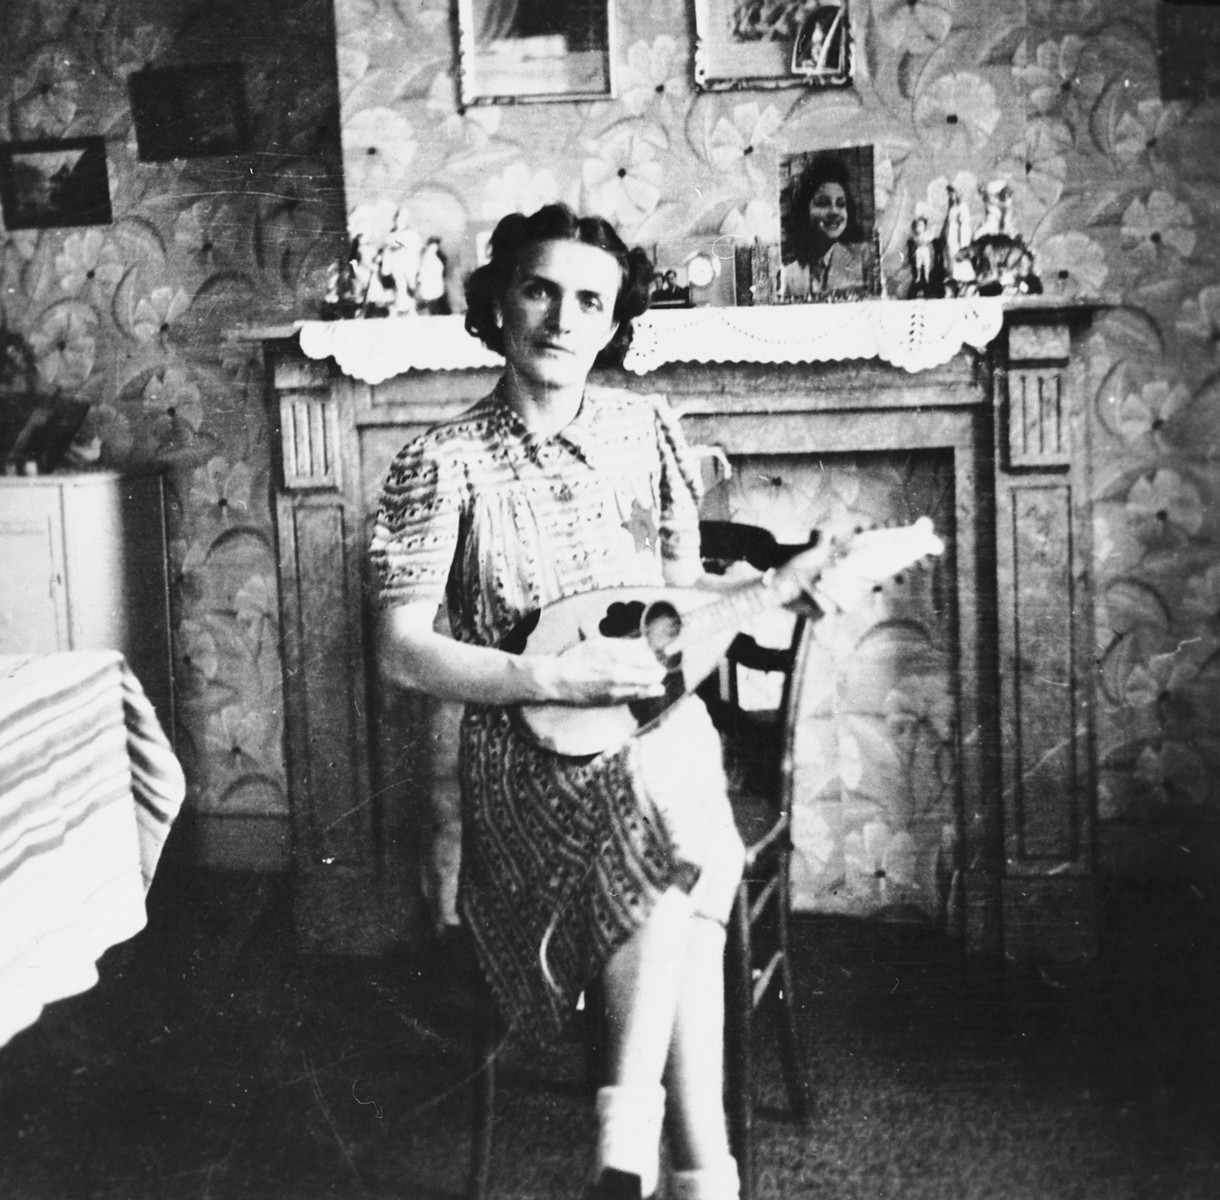 A Jewish woman living in hiding as a Christian, plays the mandolin in her apartment in Brussels.

Pictured is Leah Ciechanow.  She was subsequently deported to her death in Auschwitz.